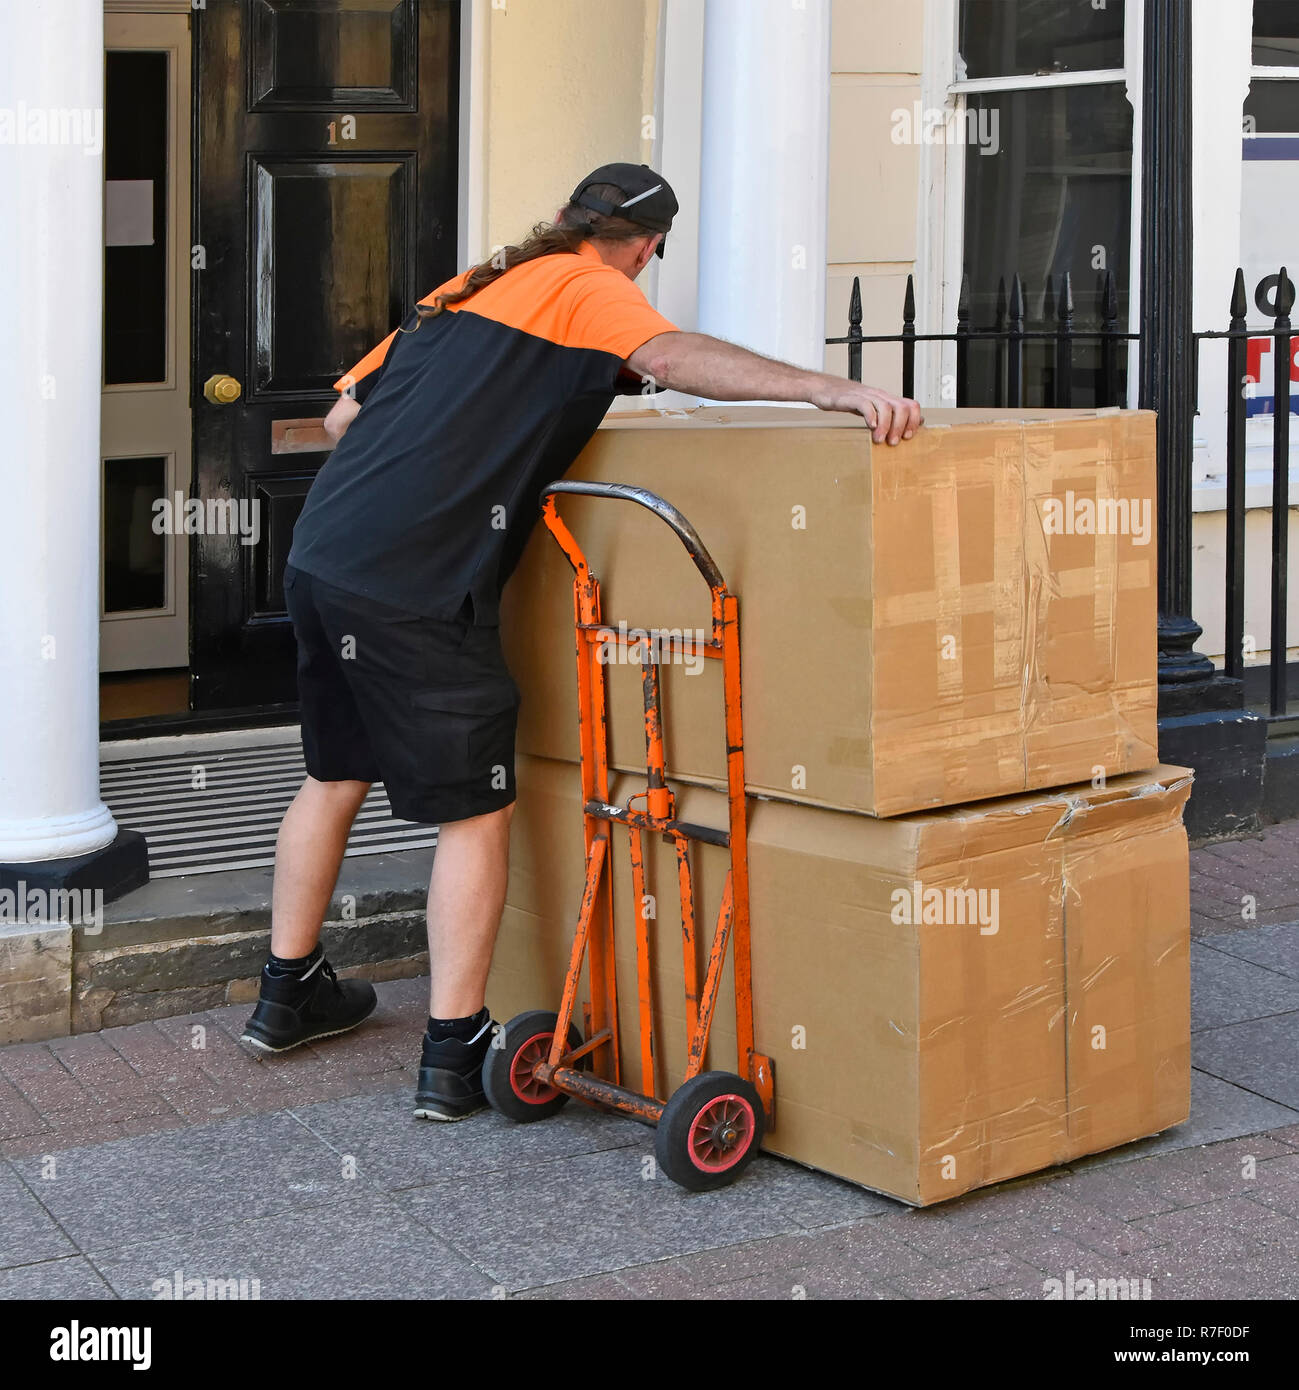 Man working as a TNT parcel delivery driver lifting cardboard box from trolley to deliver at narrow entrance door  Southend on Sea Essex England UK Stock Photo